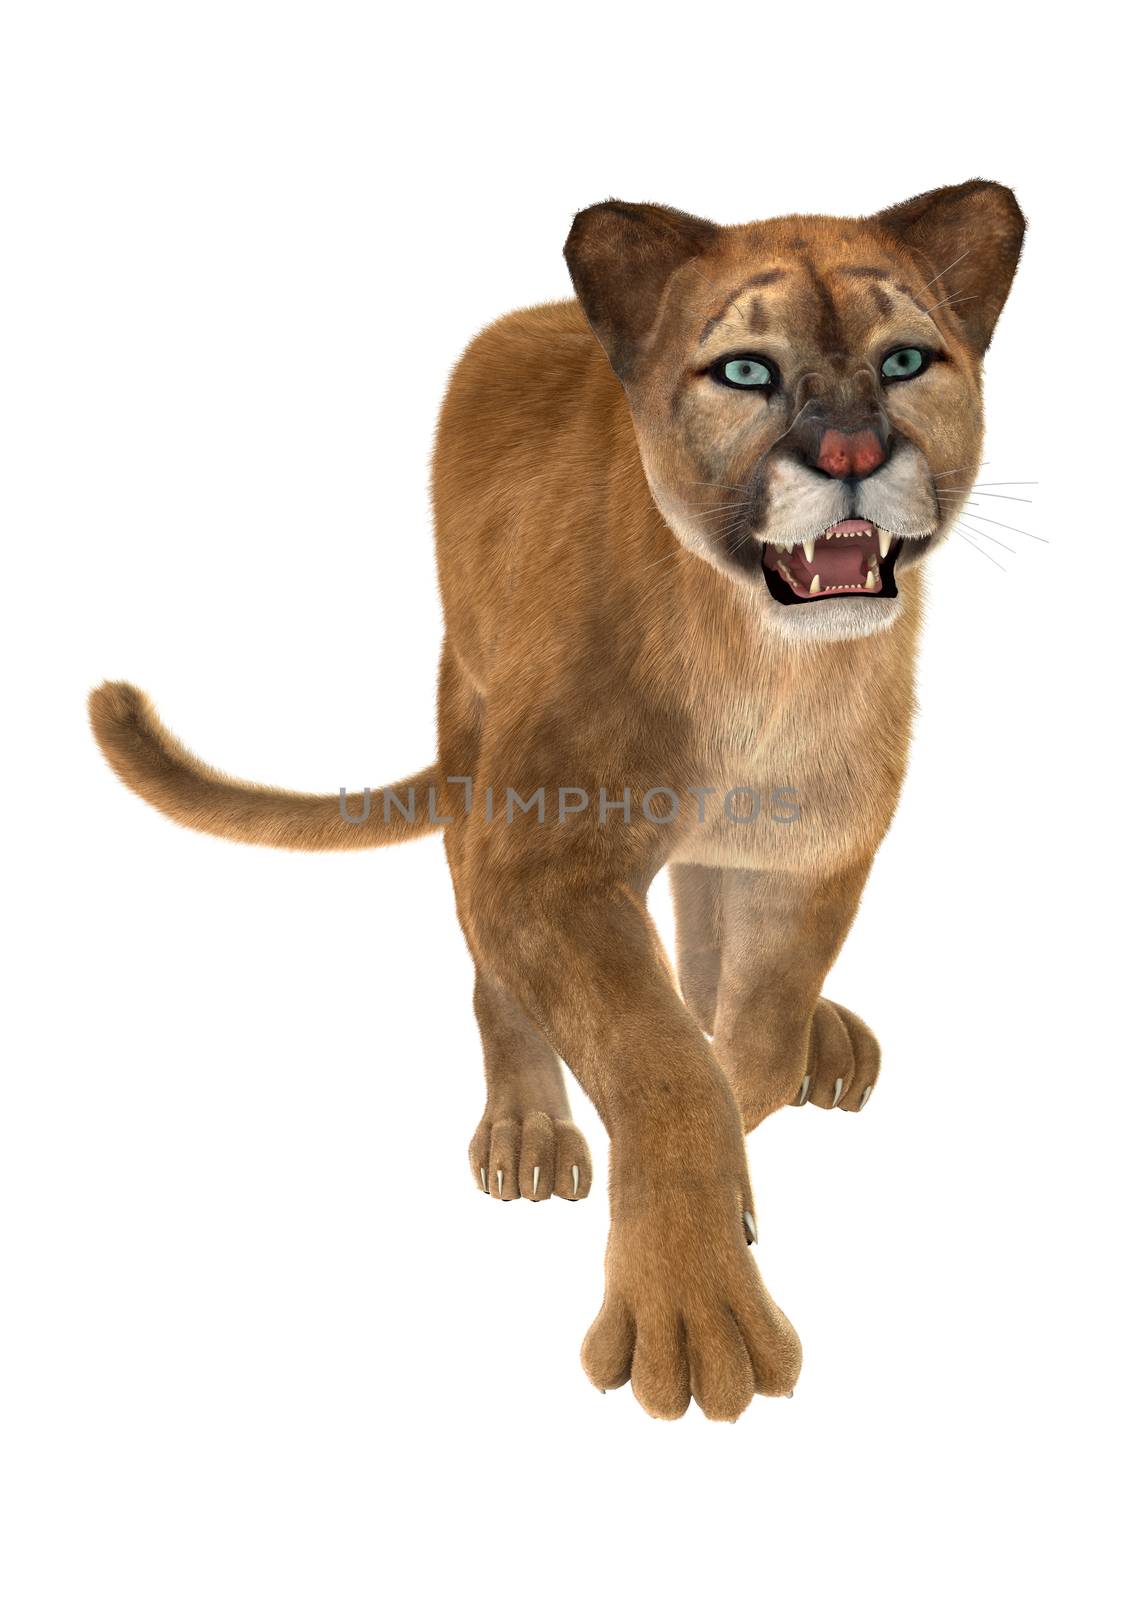 3D digital render of a big cat puma running iisolated on white background